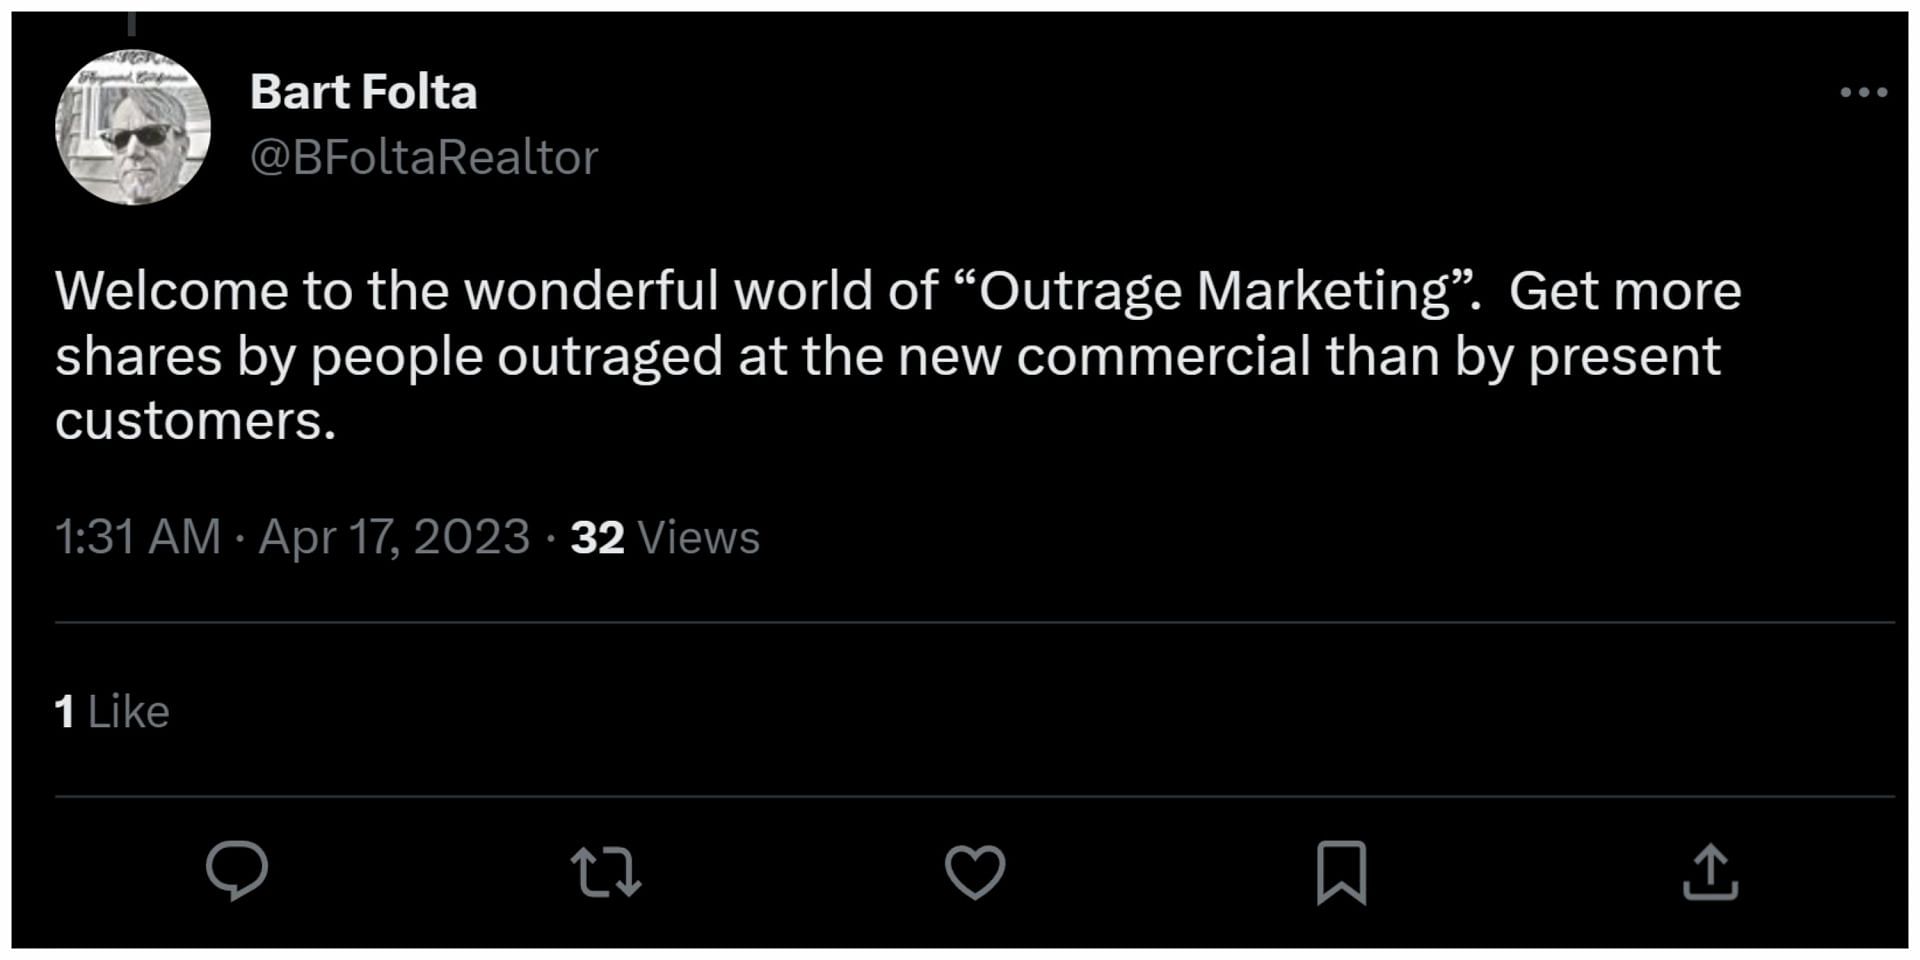 User commented on the campaign, calling it outrage marketing (Image via Twitter/BFoltaRealtor)